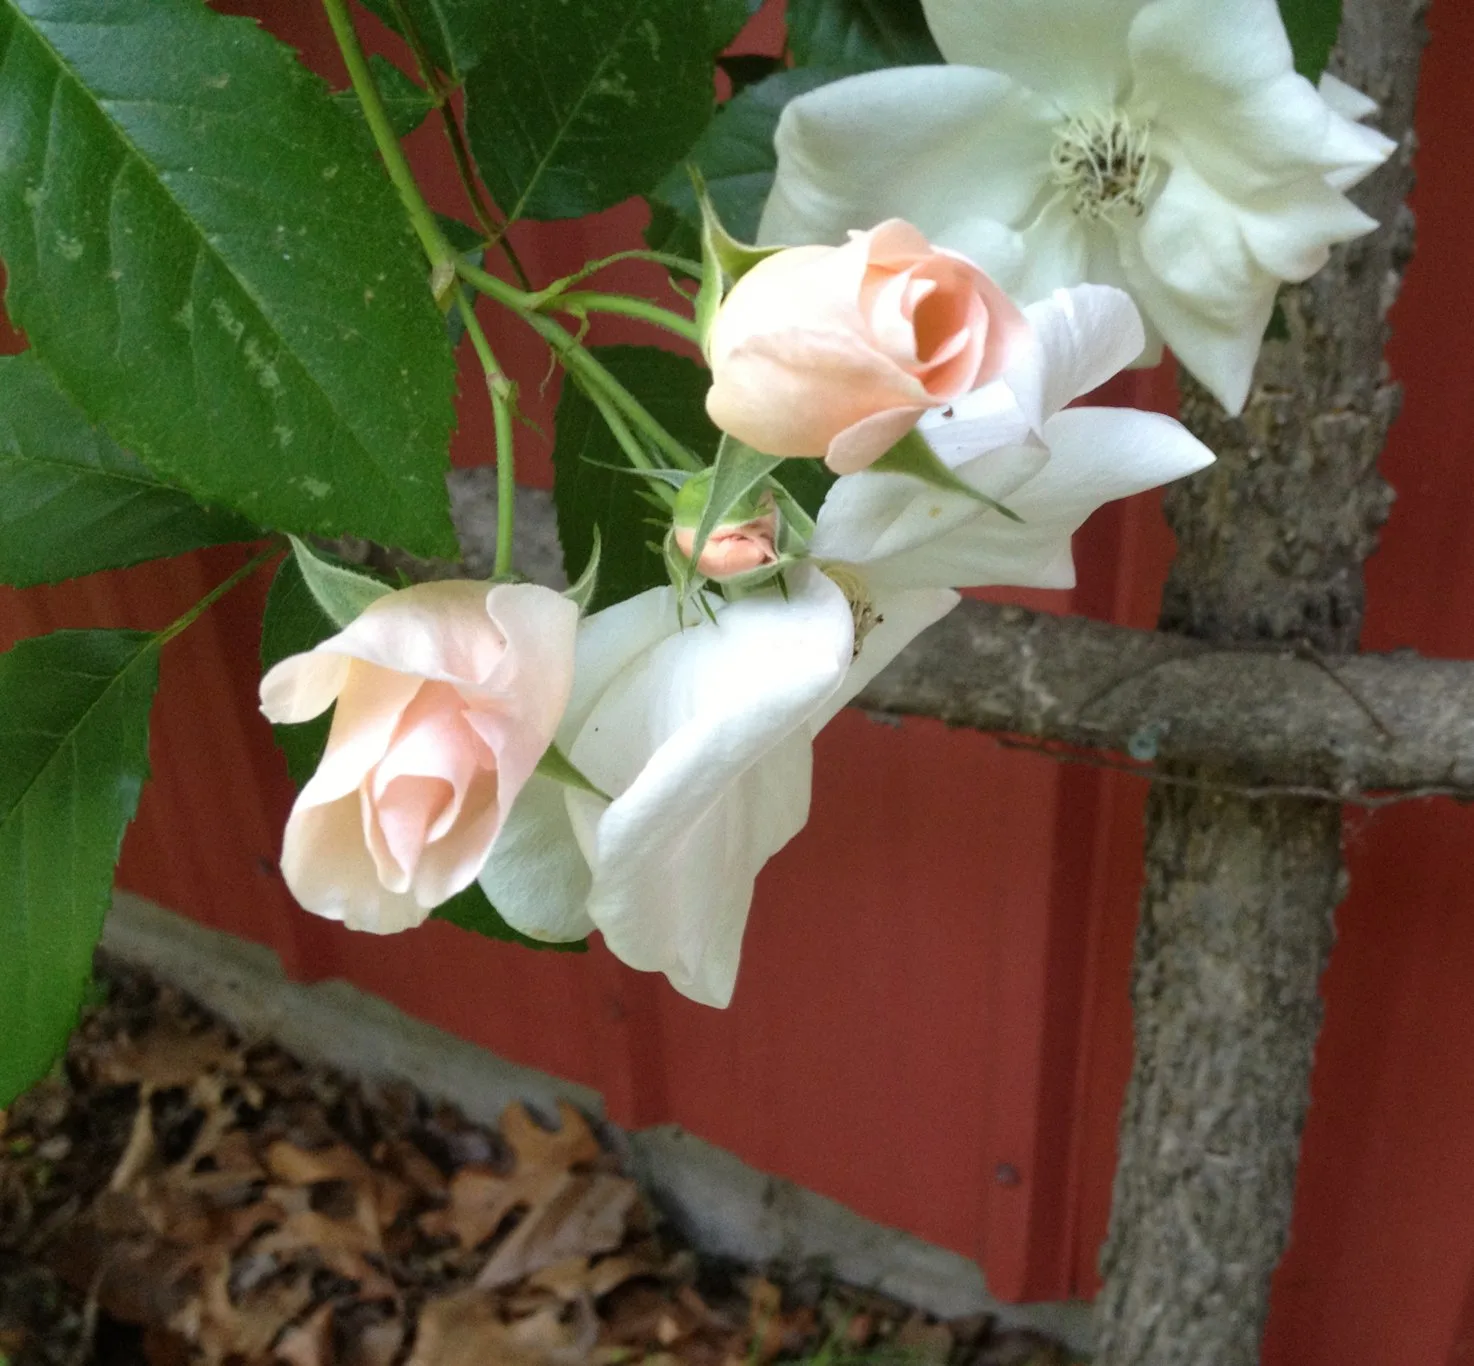 Roses growing on trellis made from chopped wood